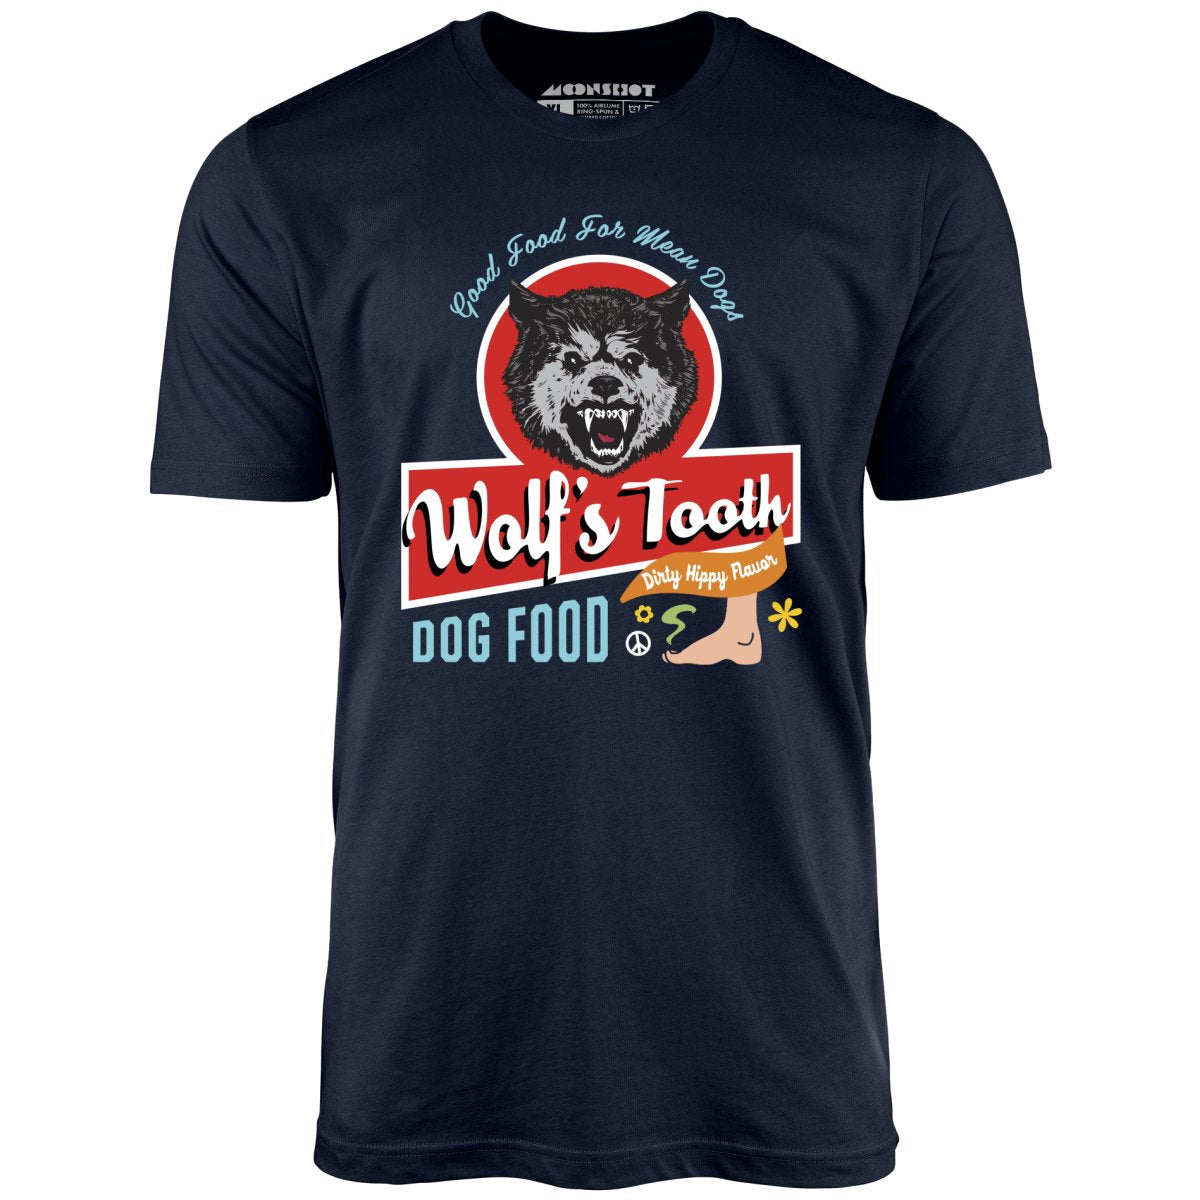 Wolf's Tooth Dog Food - Unisex T-Shirt